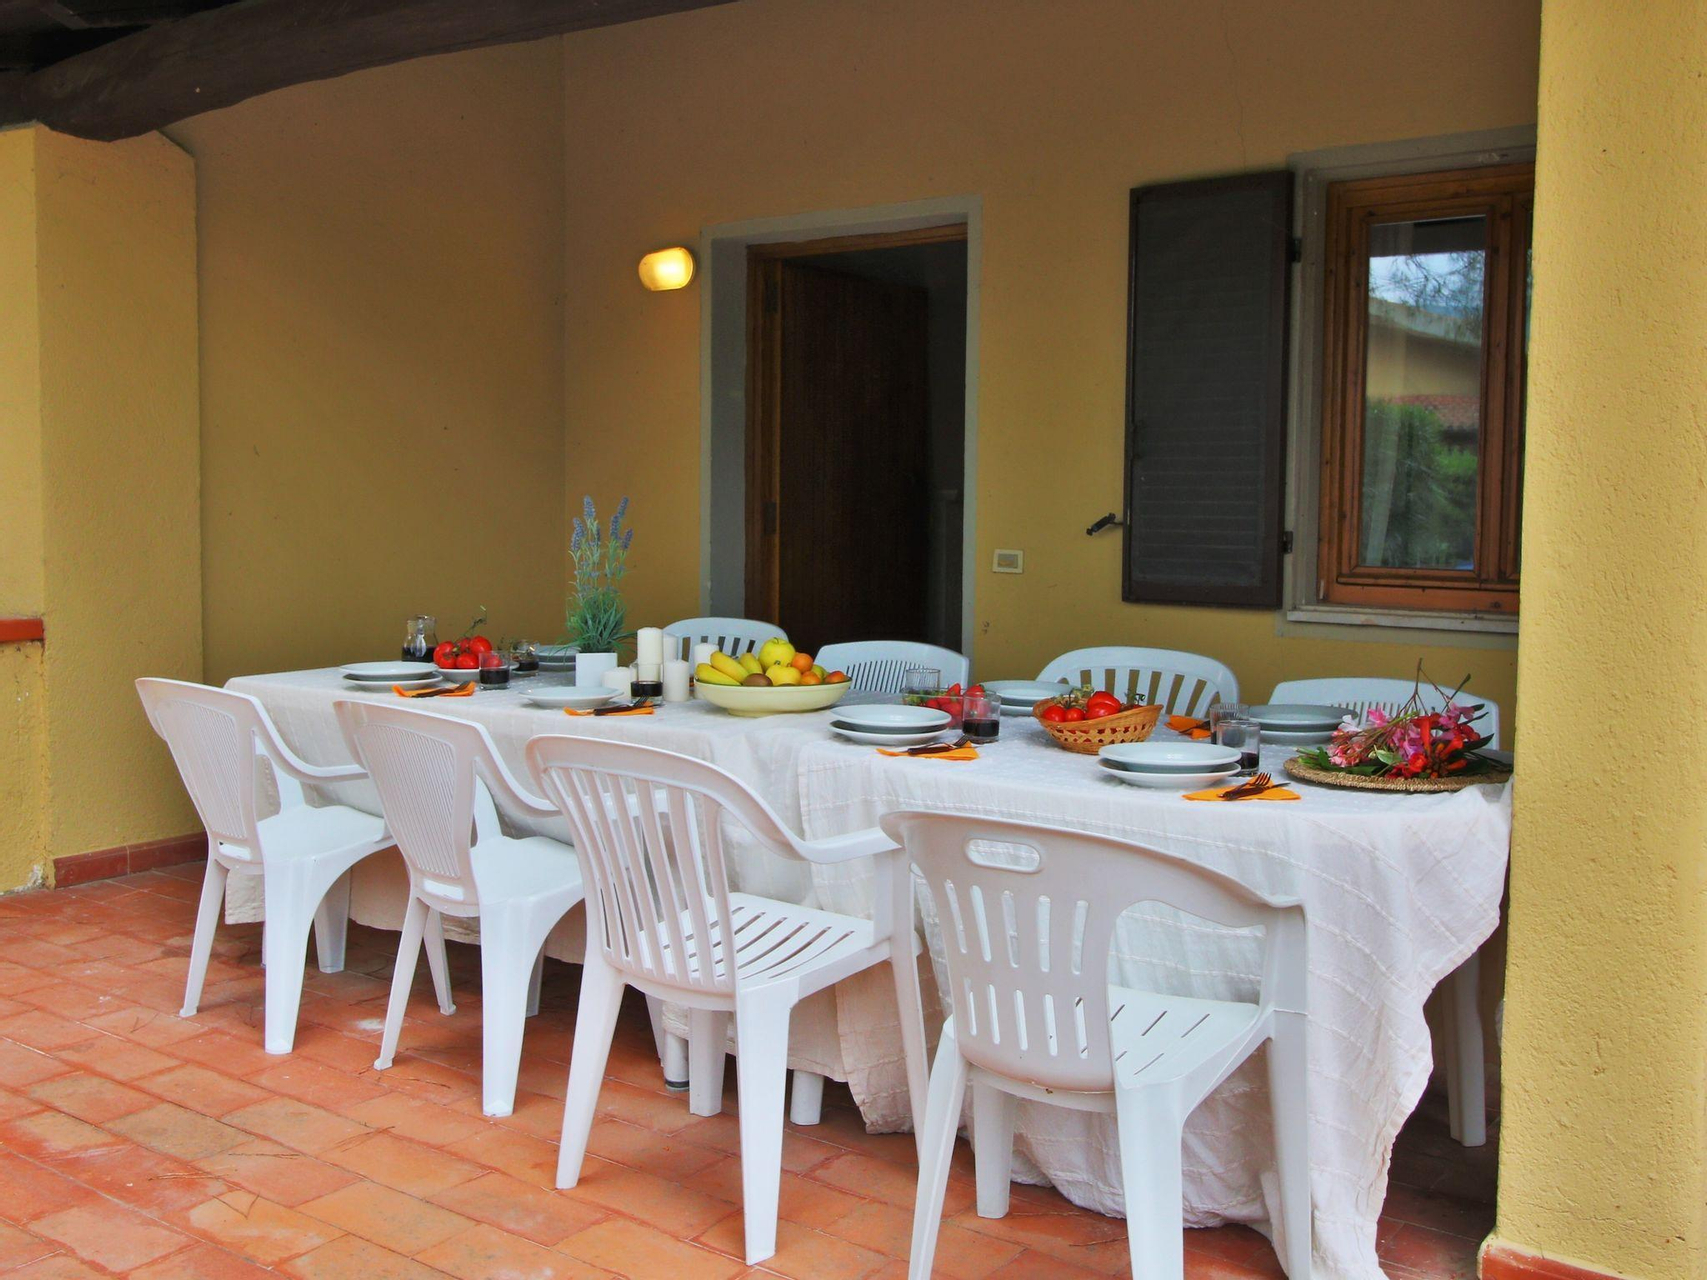 Food & Drinks, Modern Holiday Home in Giannella Italy with Private Garden, Grosseto